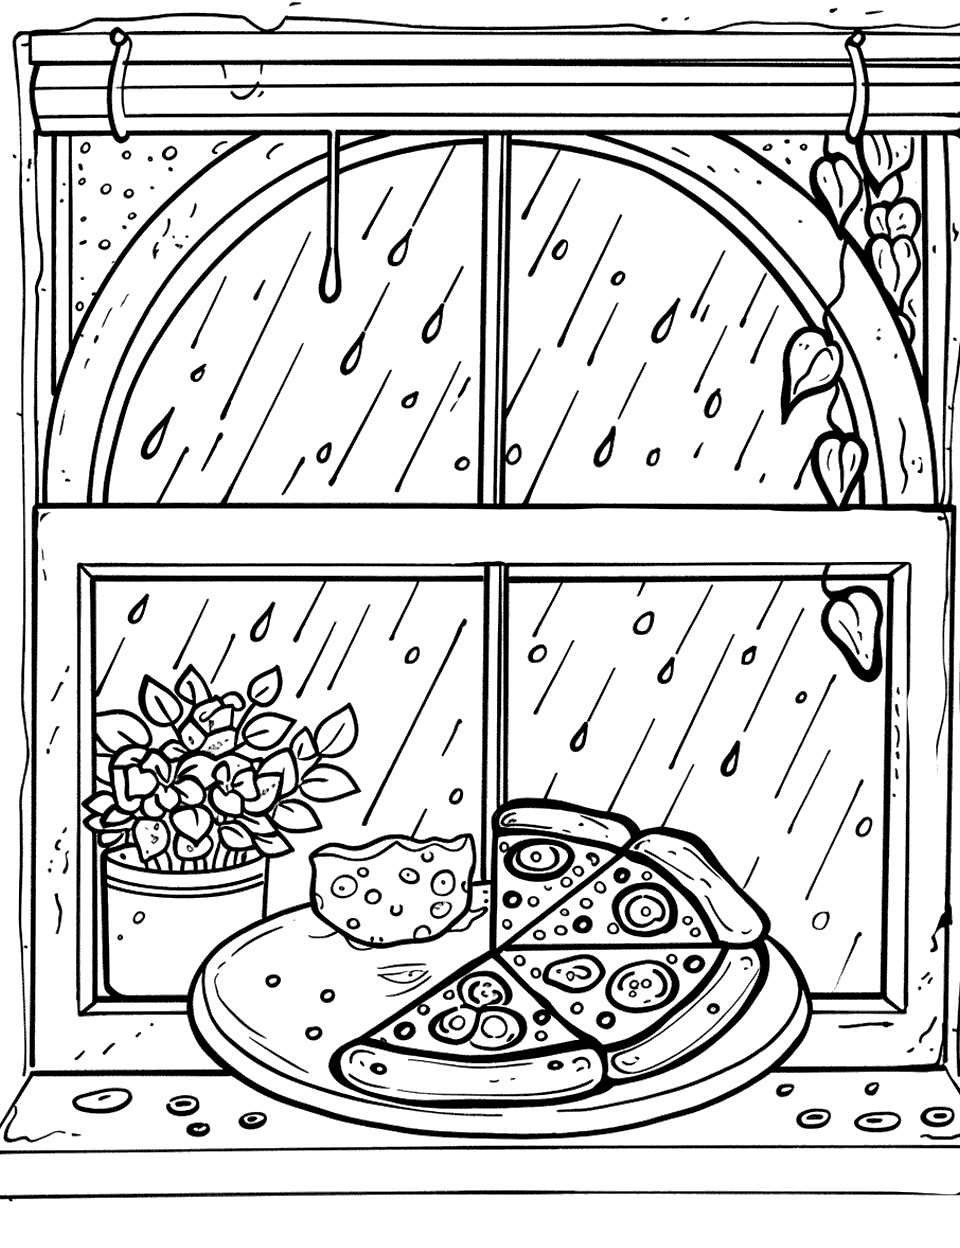 Rainy Day Pizza Coloring Page - A window scene with rain outside and a cozy pizza slices on the windowsill.